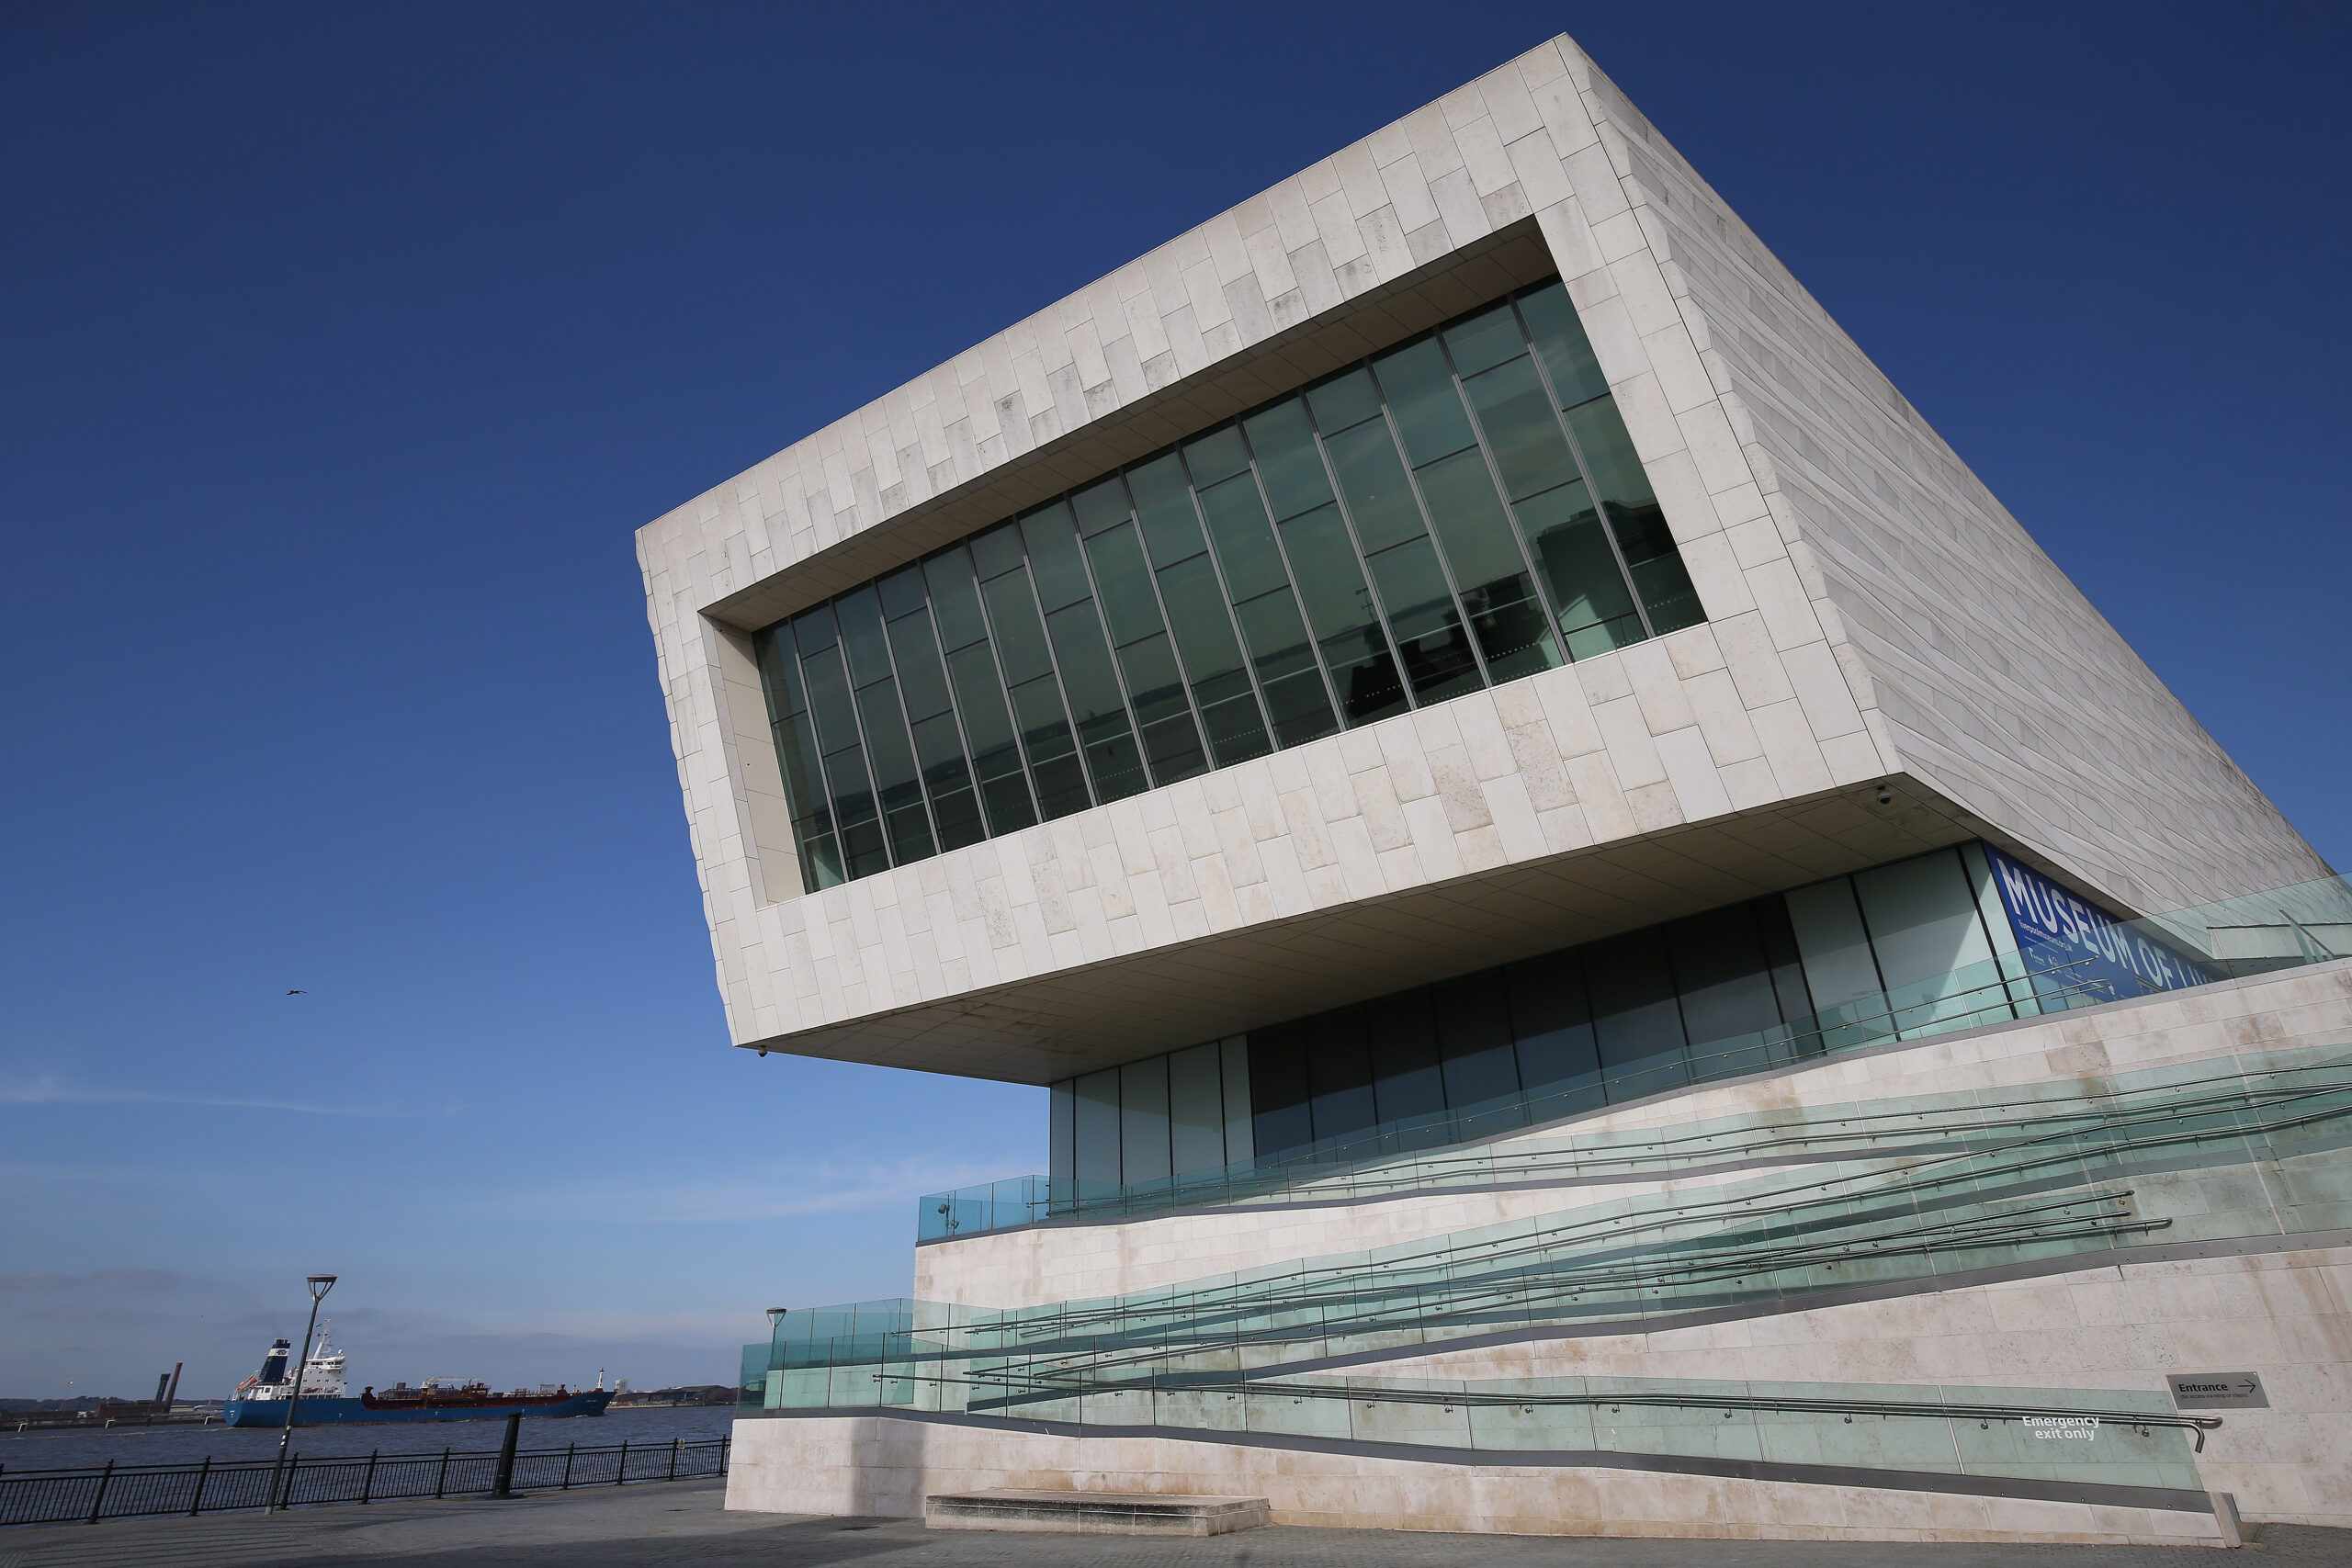 concrete exterior of the museum of liverpool against blue sky